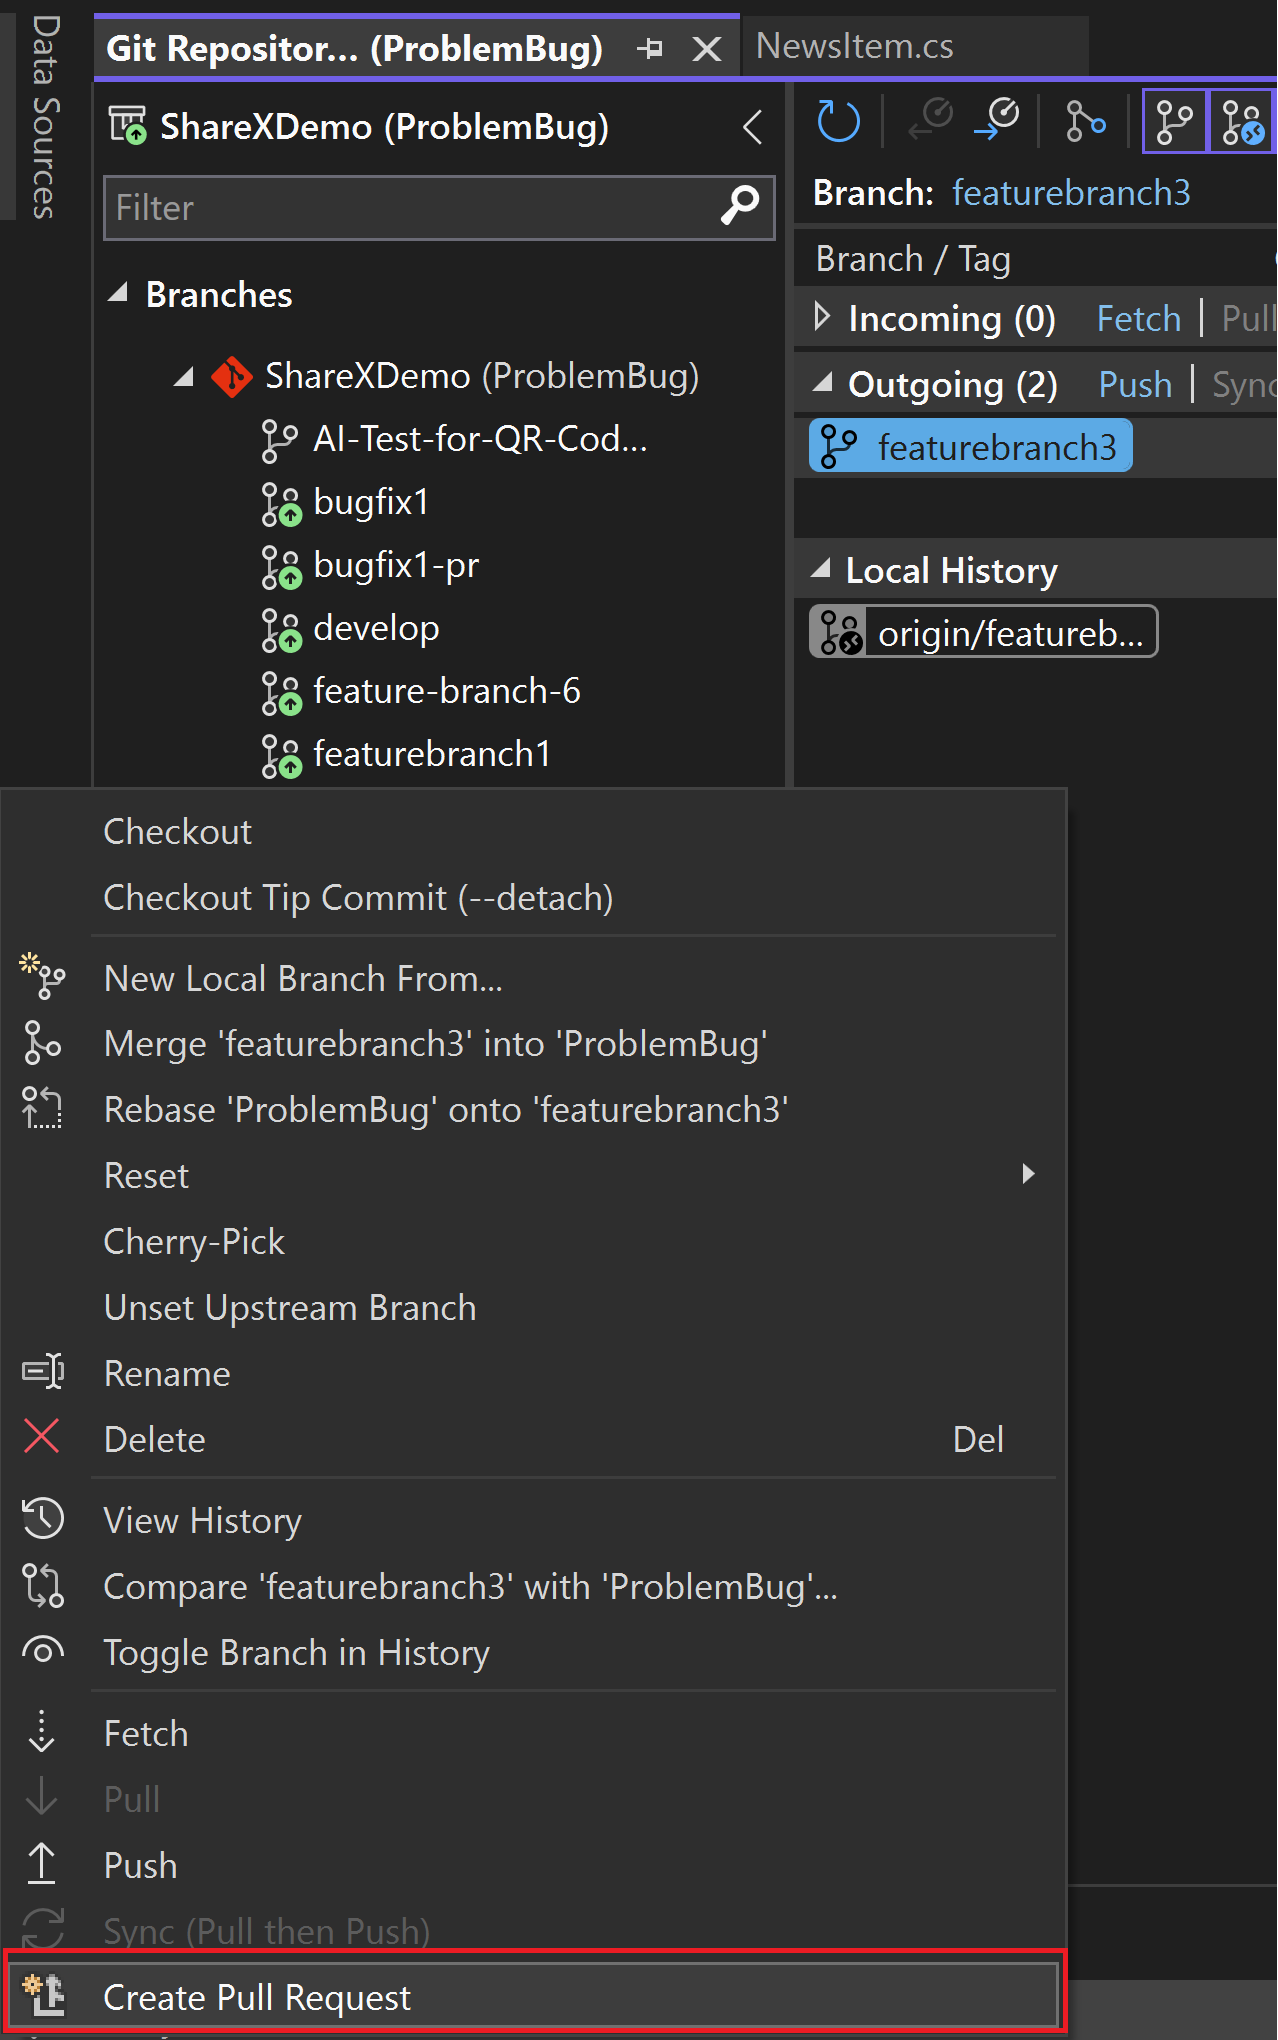 The Git Repository window with the outgoing / incoming link text highlighted in Visual Studio 2022.